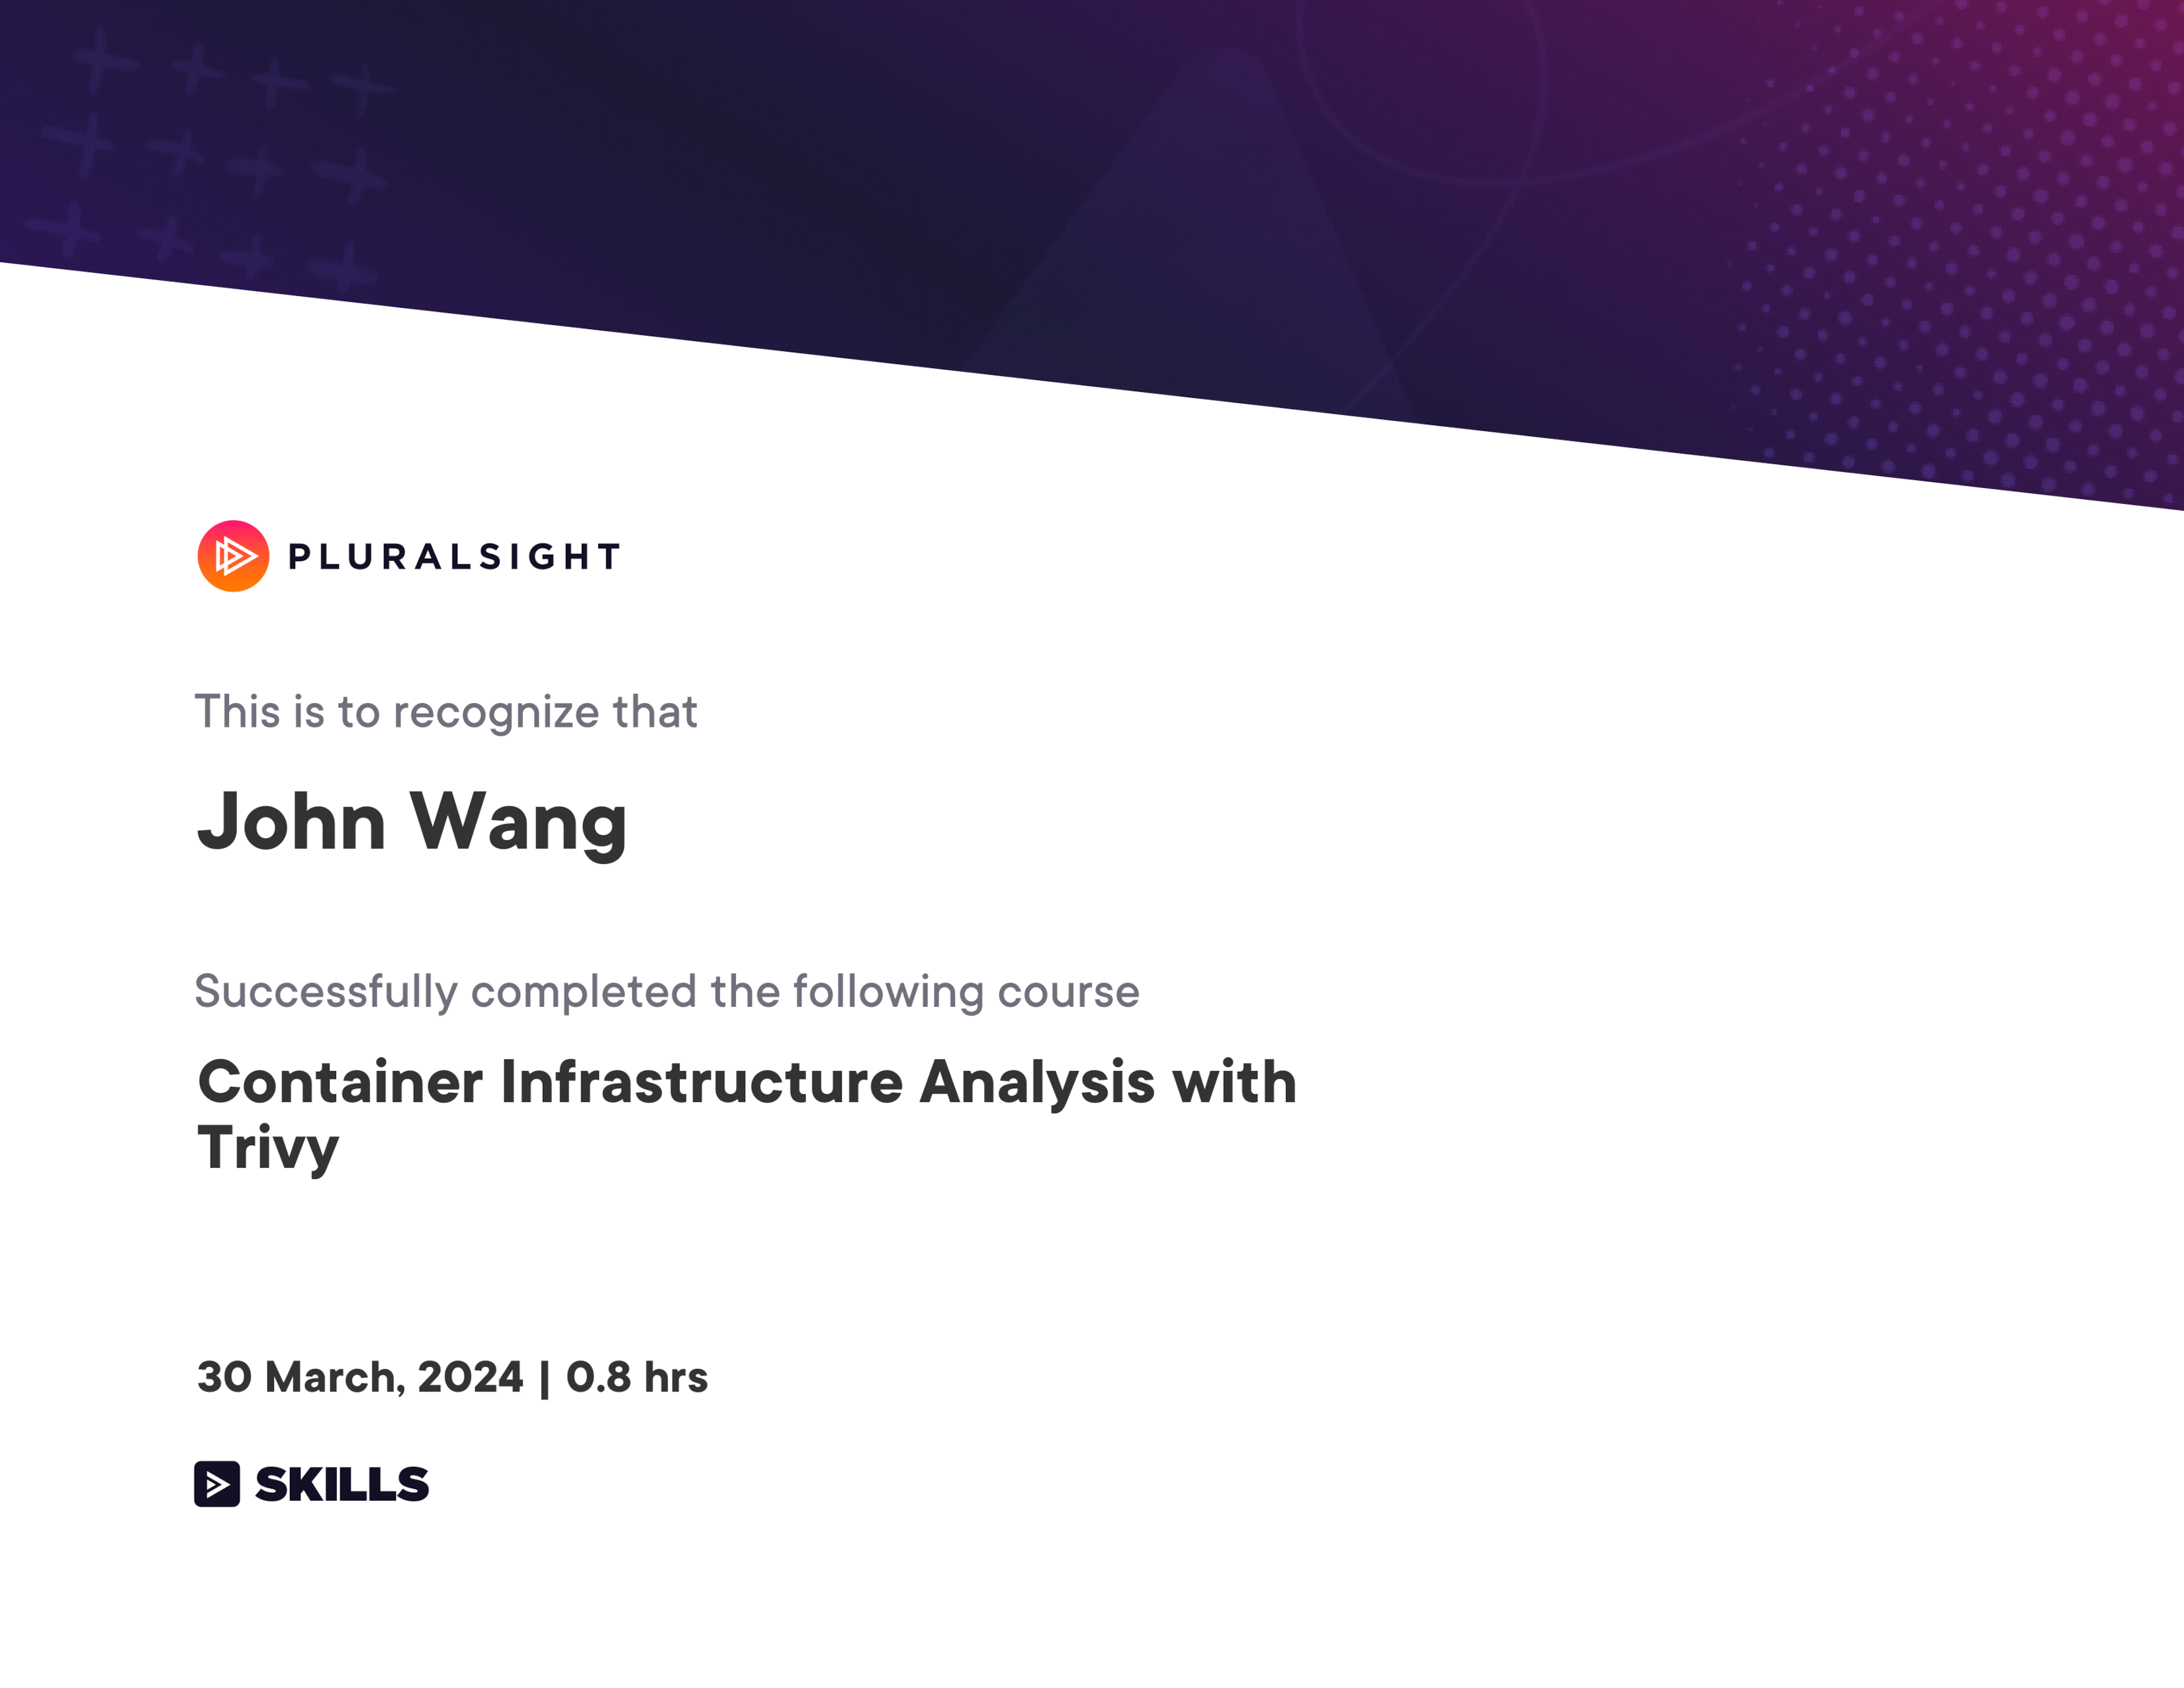 John's Container Infrastructure Analysis with Trivy from Pluralsight by Zach Roof